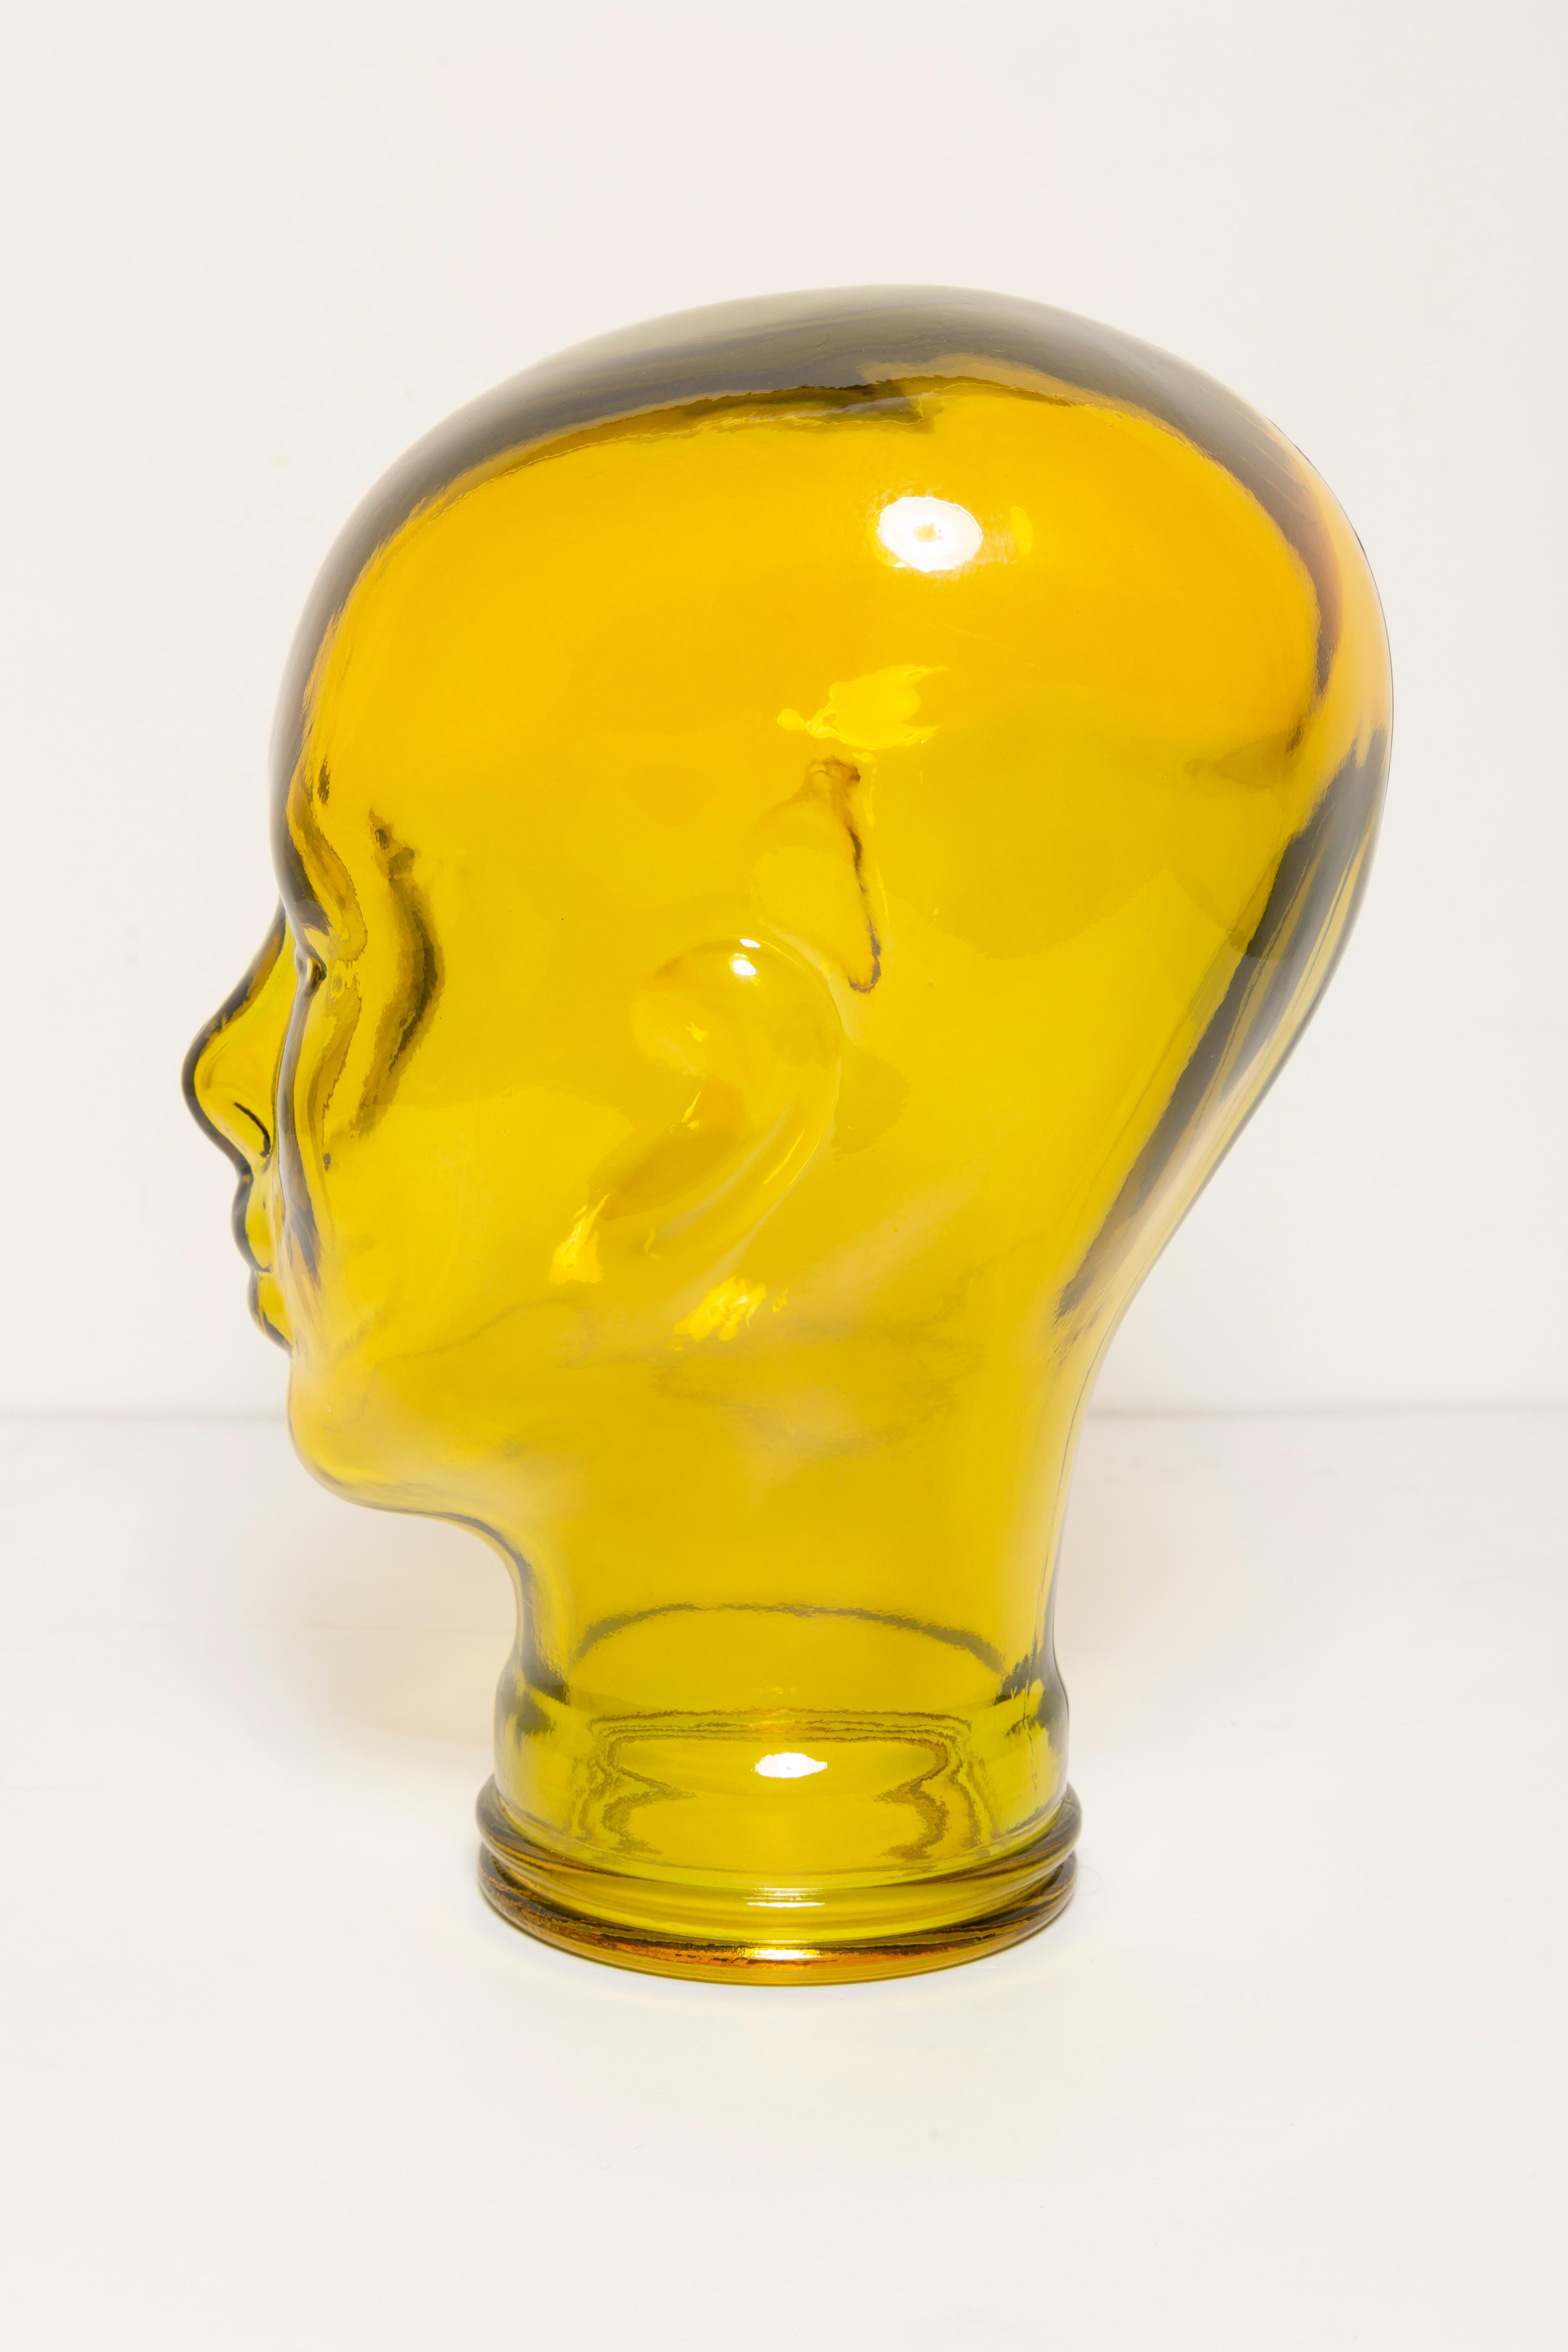 Yellow Vintage Decorative Mannequin Glass Head Sculpture, 1970s, Germany For Sale 5